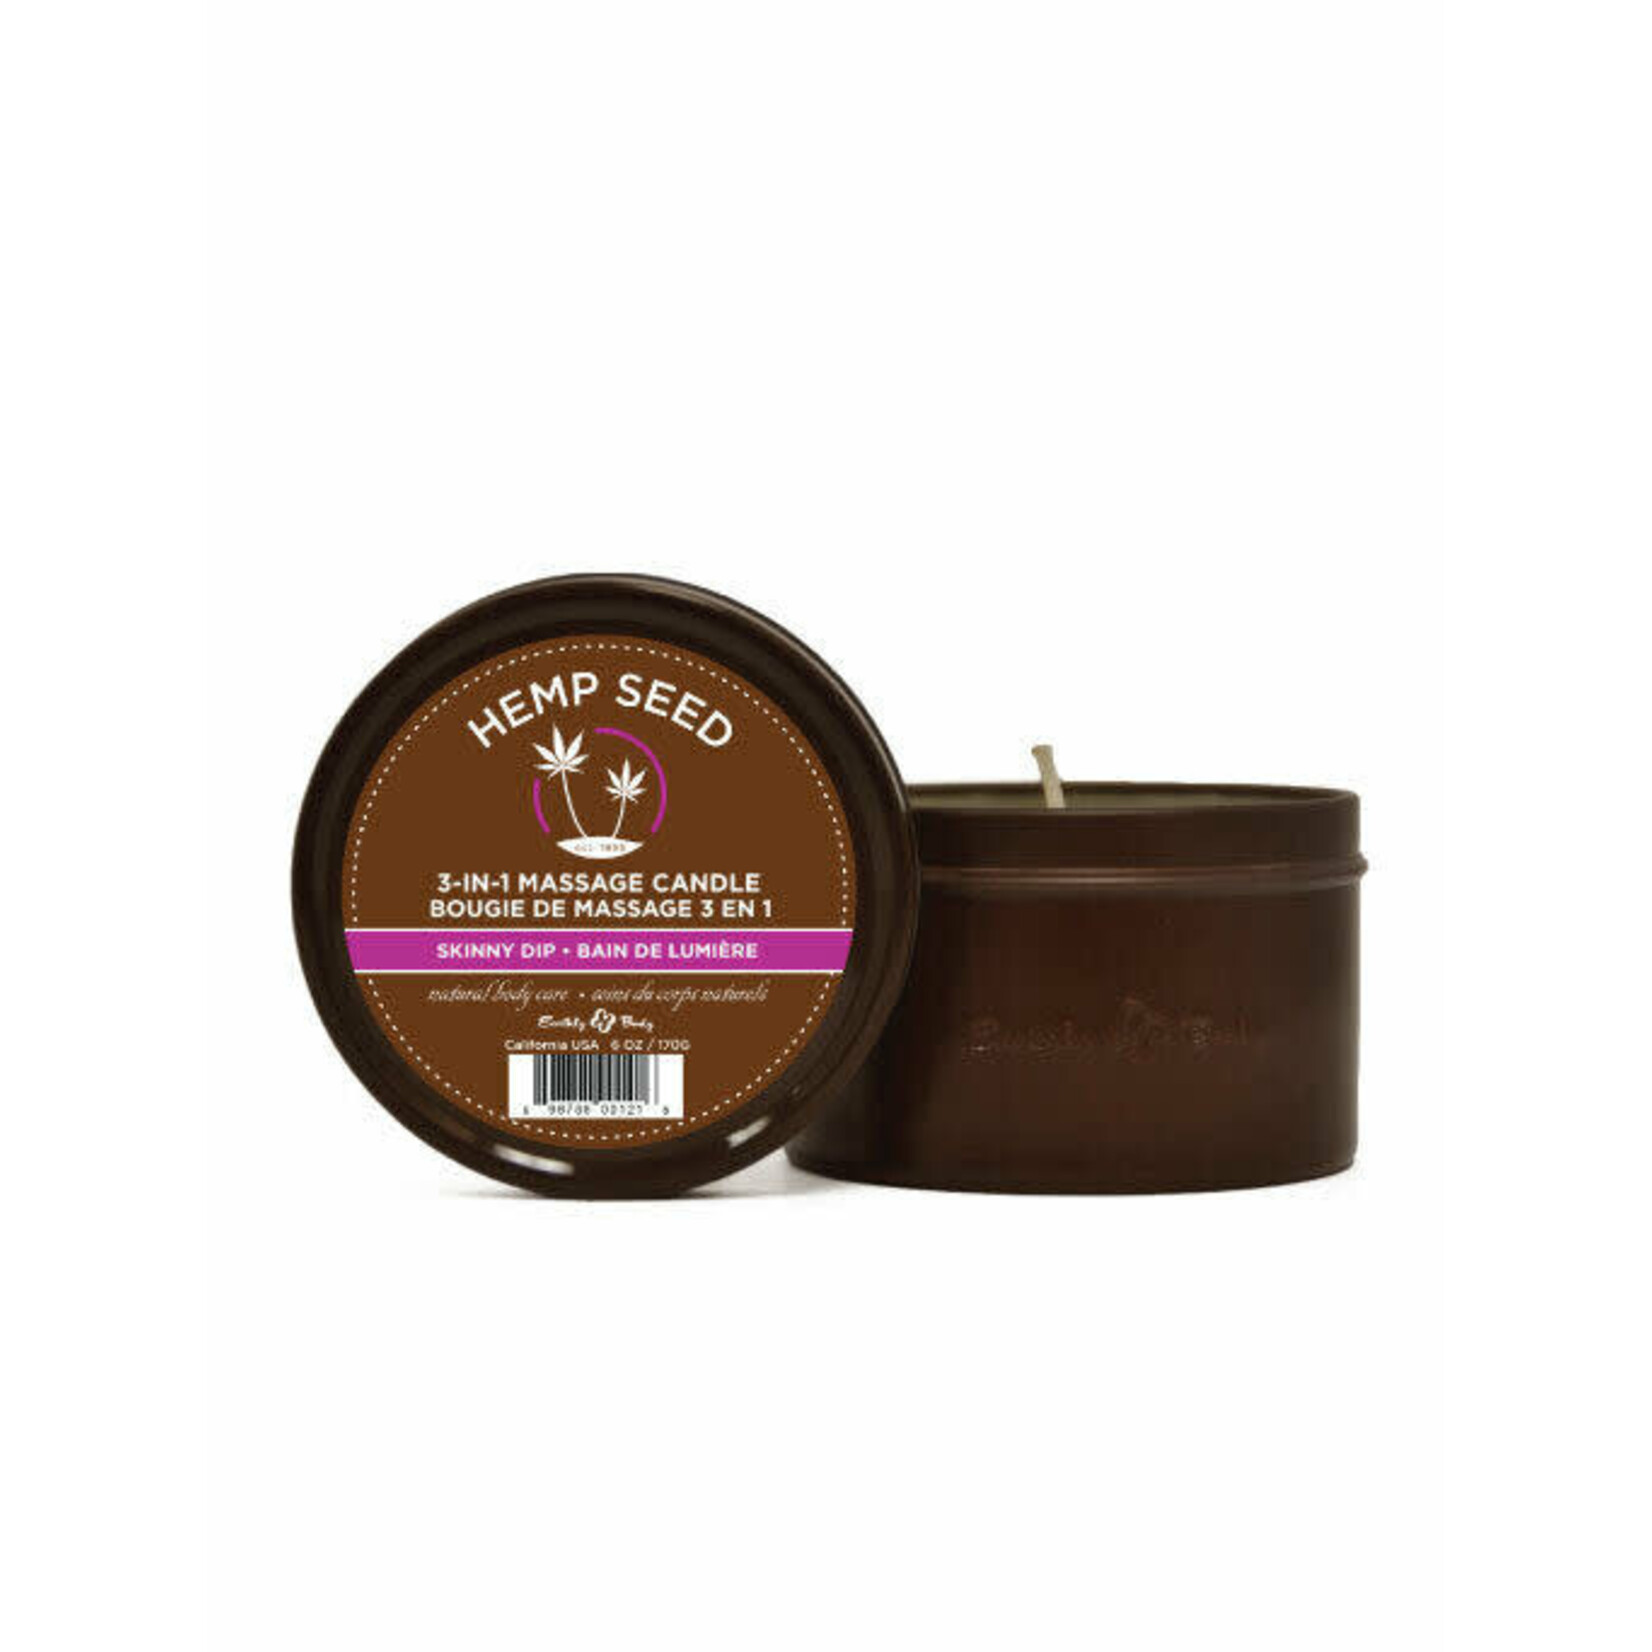 EARTHLY BODY EARTHLY BODY - ROUND CANDLES SKINNY DIP 6OZ. (20471)